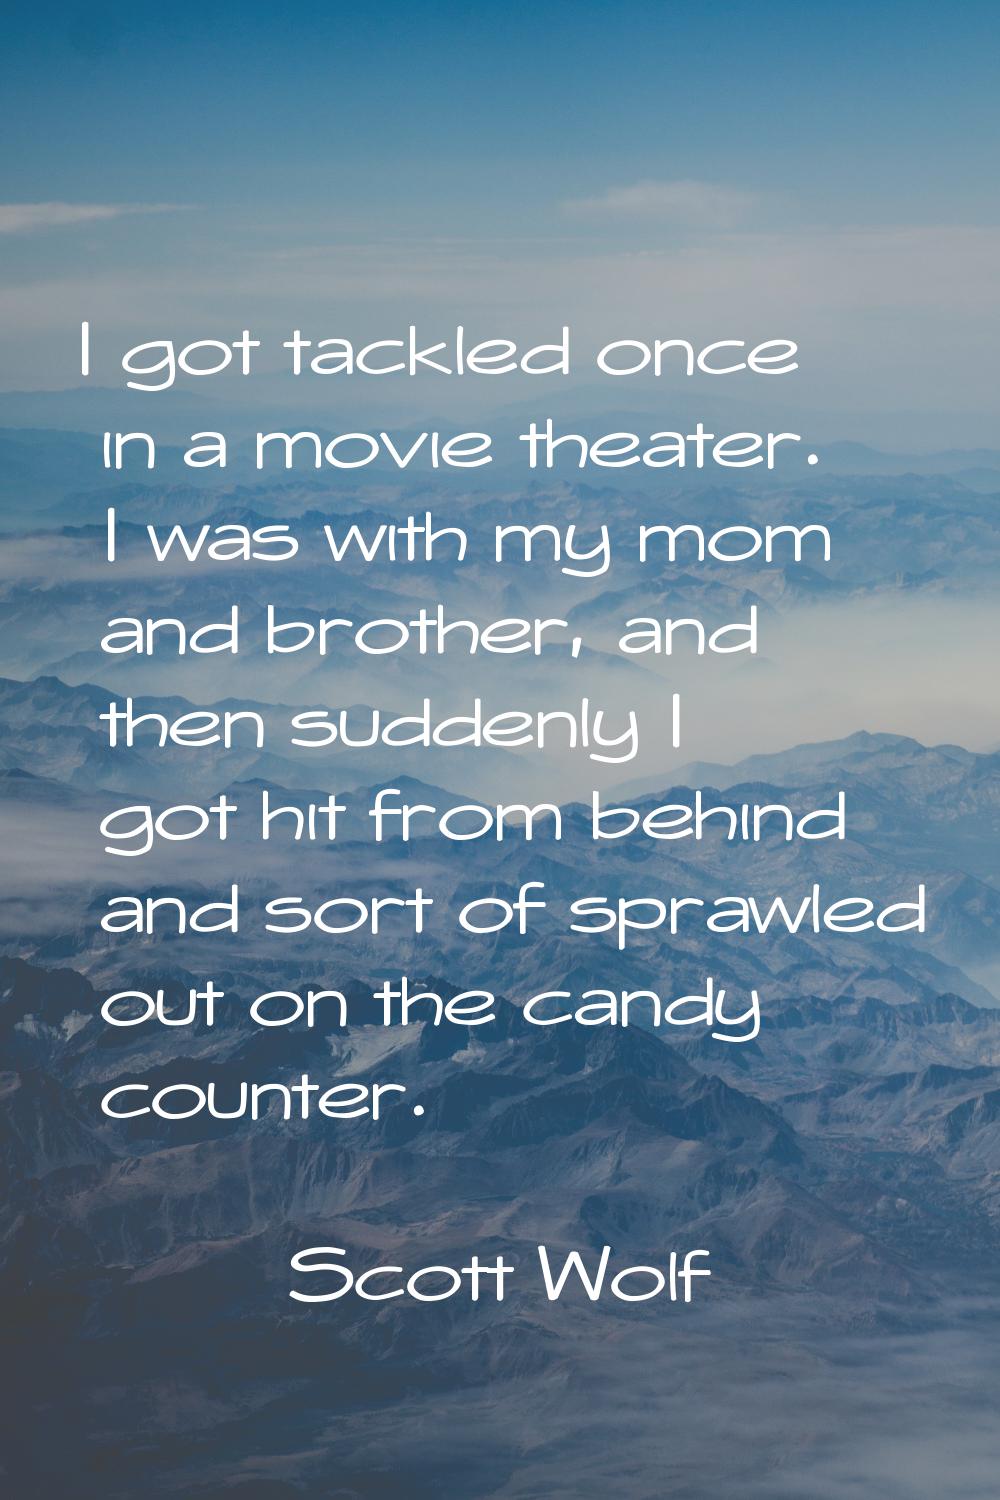 I got tackled once in a movie theater. I was with my mom and brother, and then suddenly I got hit f